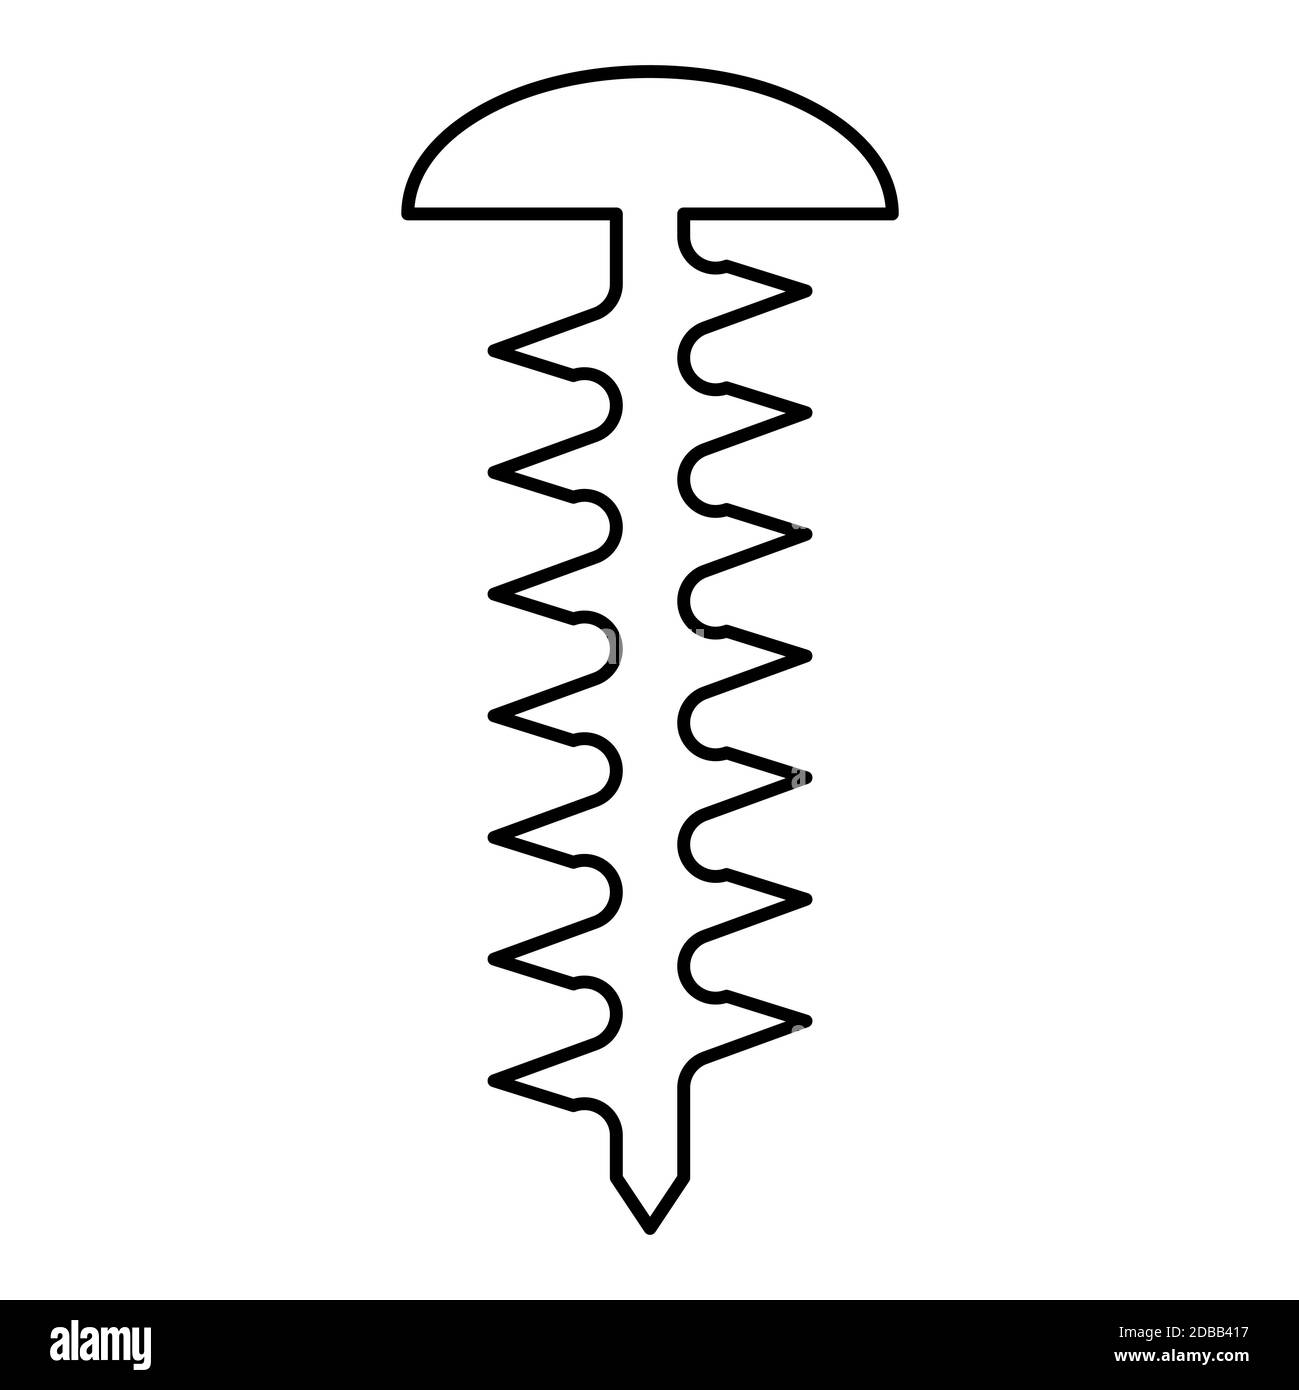 Round head screw Self-tapping Hardware Construction element icon outline black color vector illustration flat style simple image Stock Photo